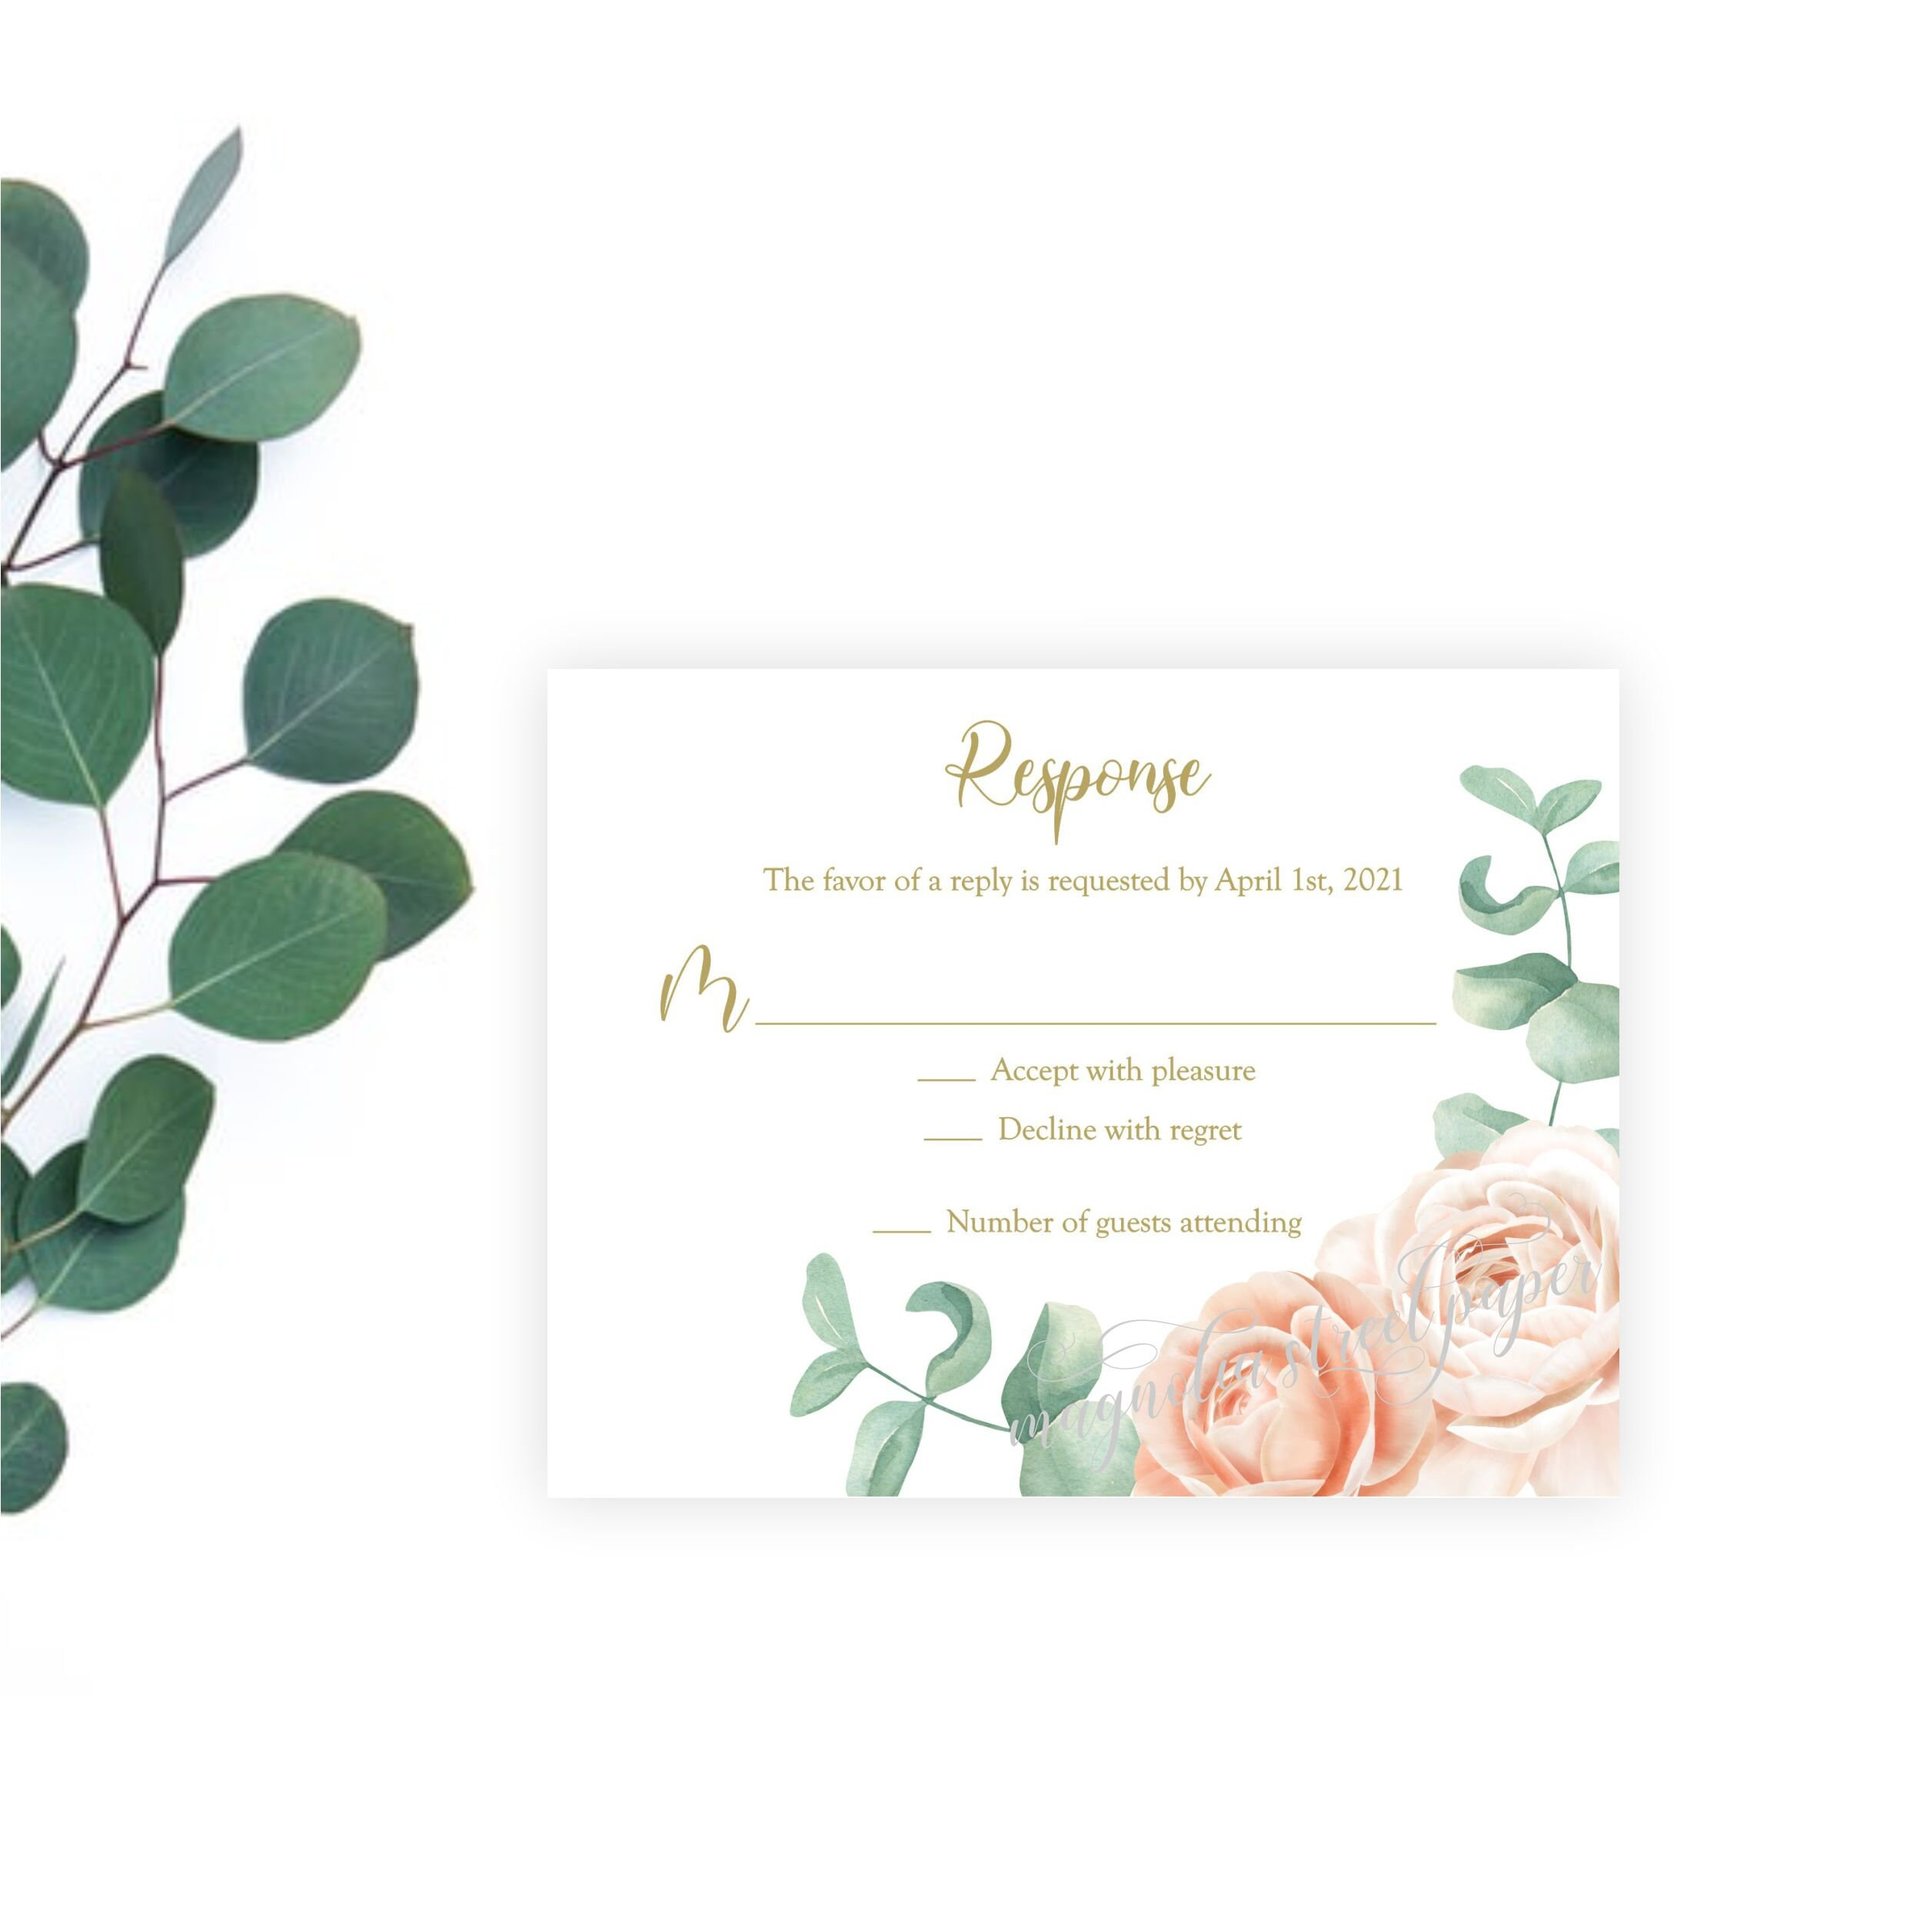 Blush and Beige Floral Wedding Invitation, Watercolor Eucalyptus Greenery Suite, Modern Botanical, Printable or Printed, P1